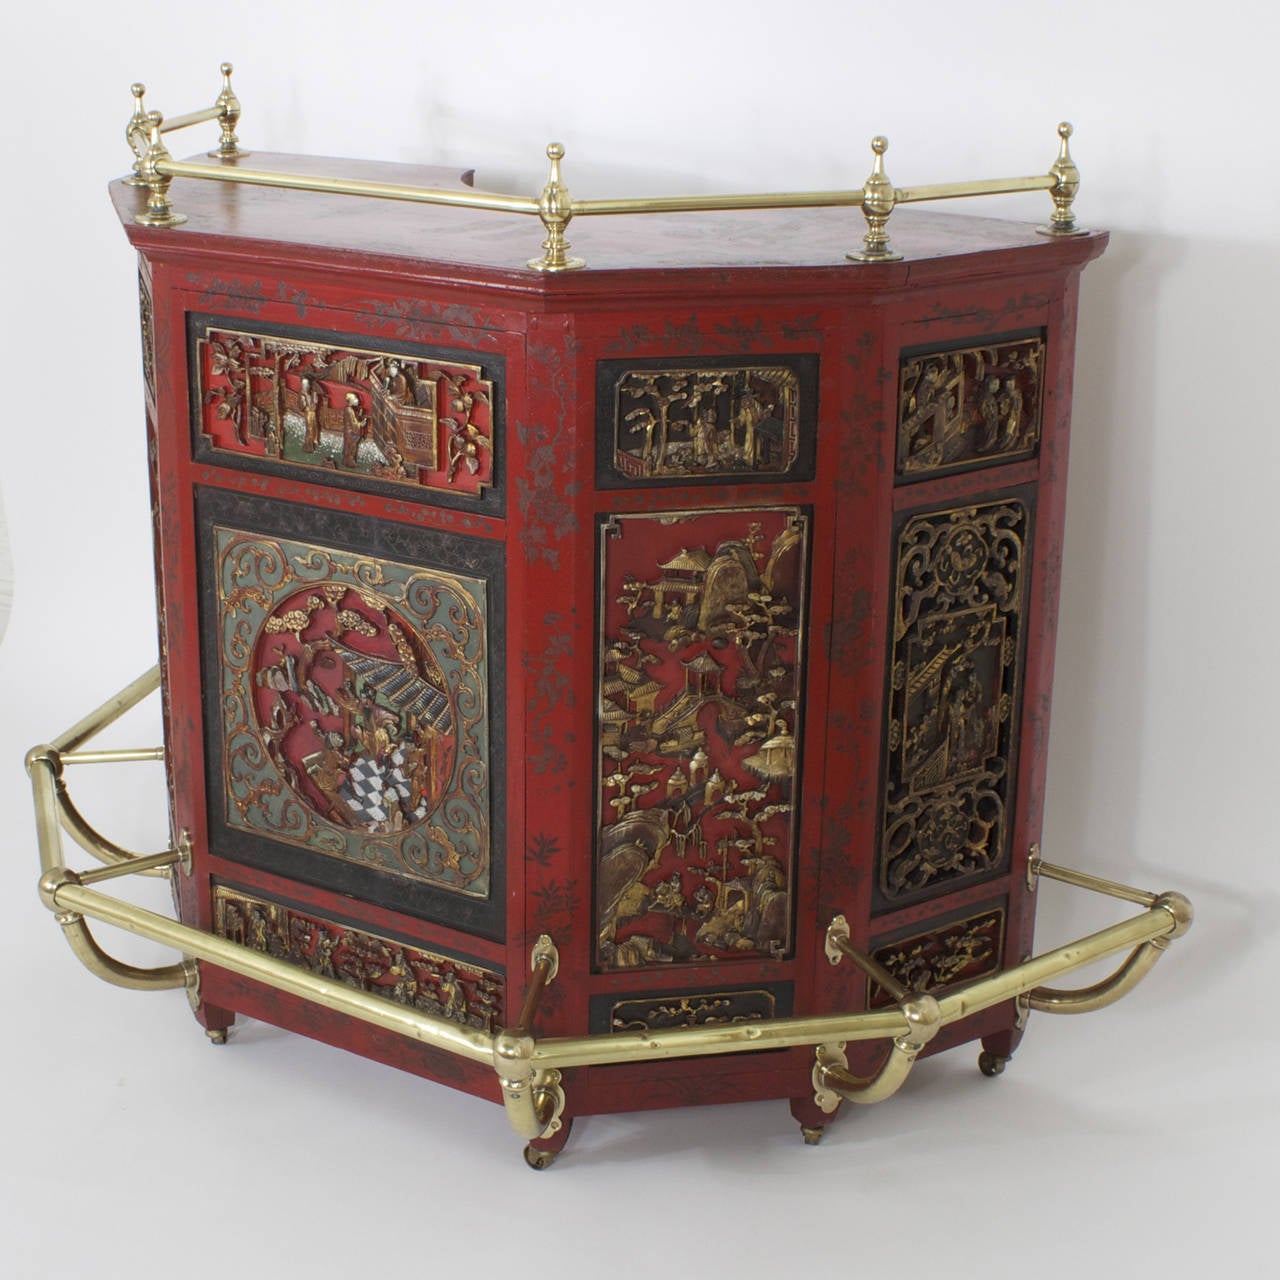 Chinoiserie Early to Mid 20th C. Carved Wood and Lacquer Stand Up Chinese Bar